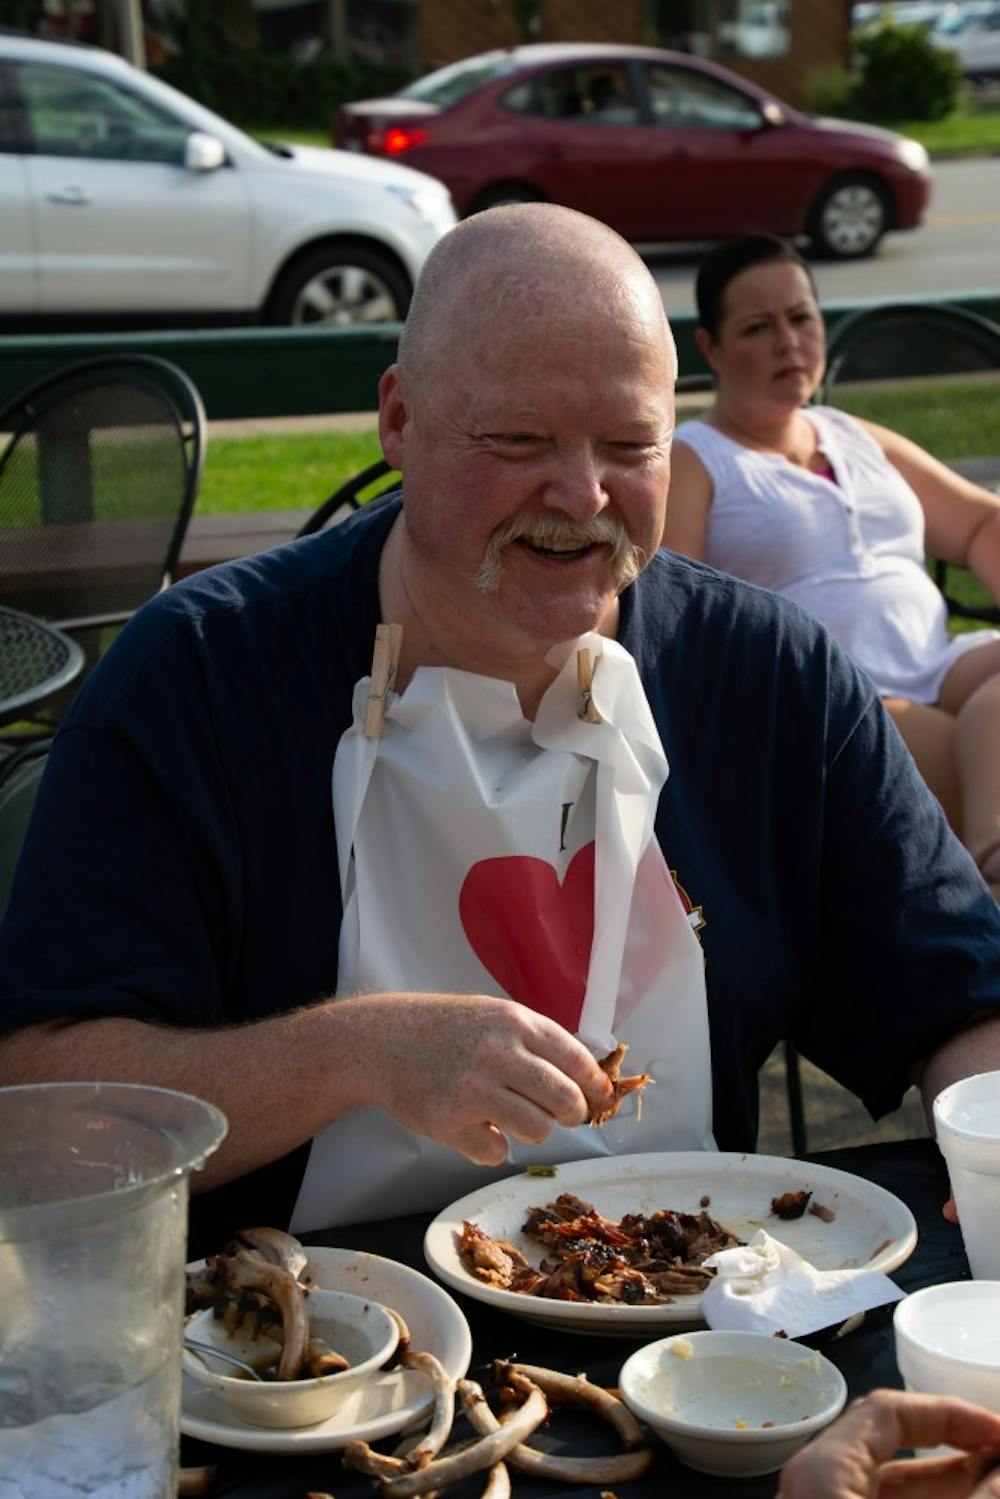 A member of the Muncie Fire Department laughs in between bites at the fifth annual Battle of the Badges rib-eating challenge Sept. 18, 2018, at Texas Roadhouse in Muncie. The police department and fire department competed to raise money for selected charities. Leslie Gartrell,DN